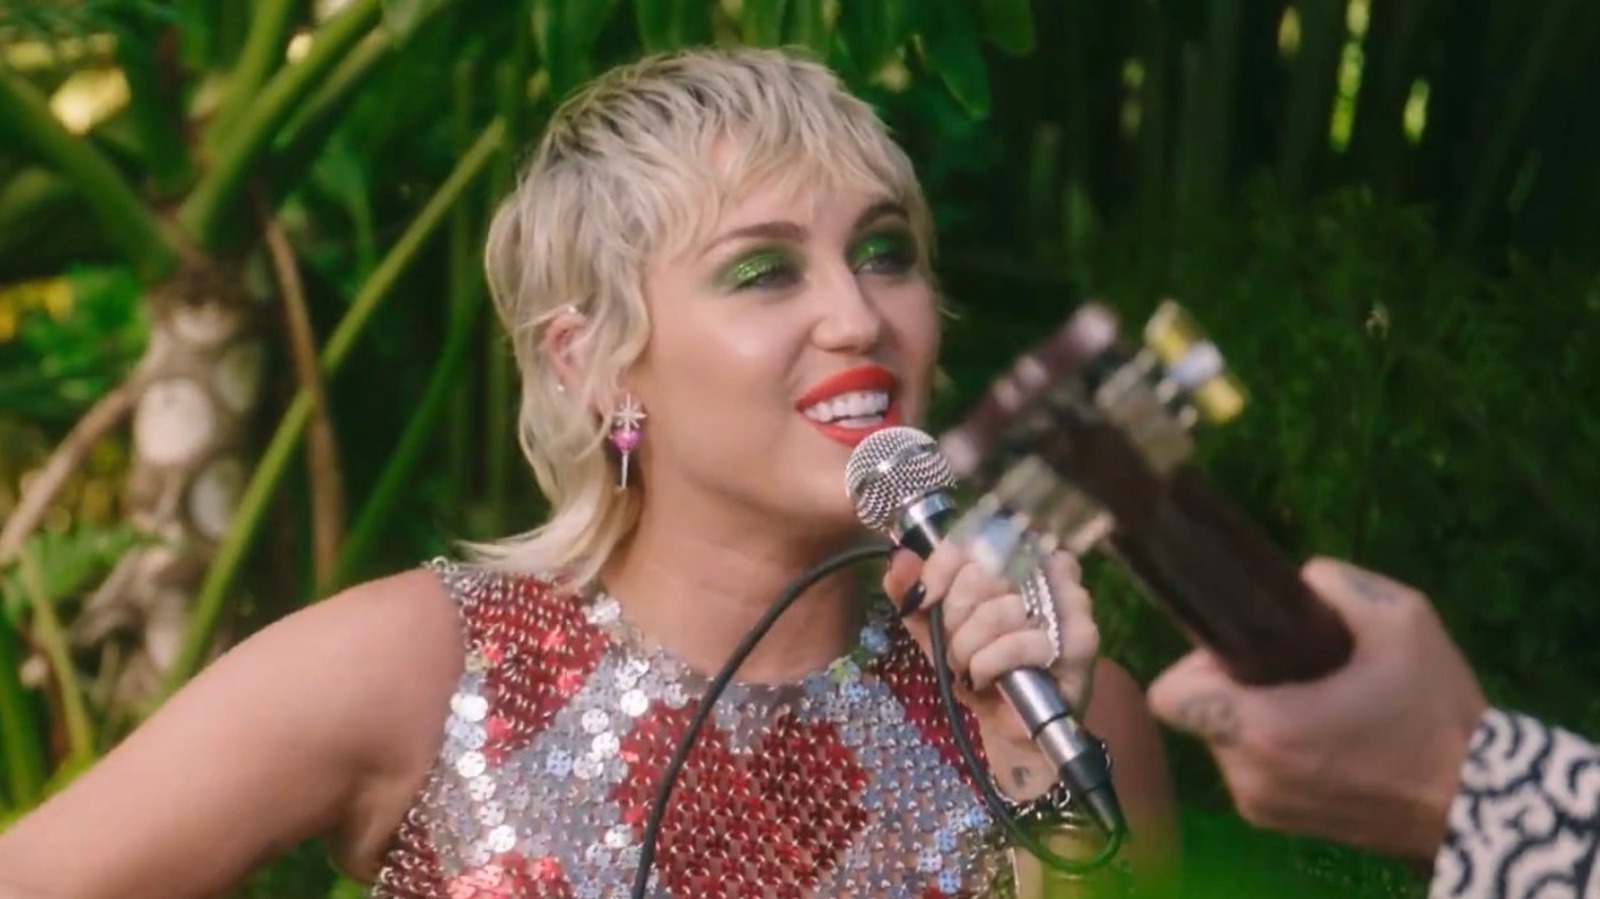 The Real Meaning Behind Miley Cyrus' 'Plastic Hearts